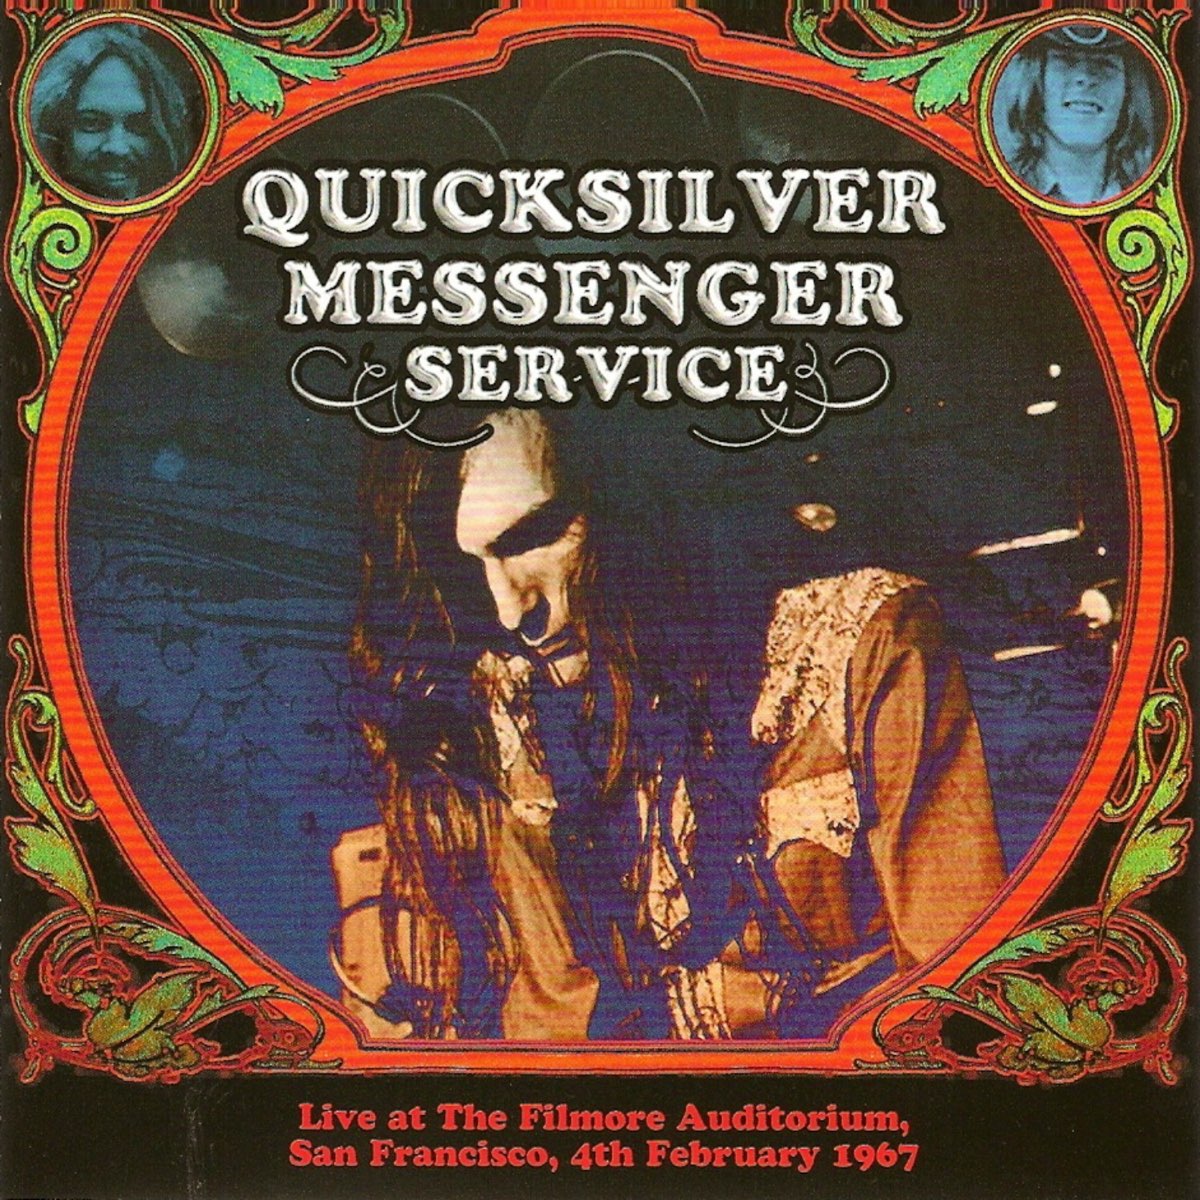 Quicksilver messenger. Quicksilver Messenger service. Quicksilver Messenger service - just for Love. Quicksilver Messenger service - Doin' time in the USA. Quicksilver Messenger service - who do you Love Suite, who do you Love (Part 1).